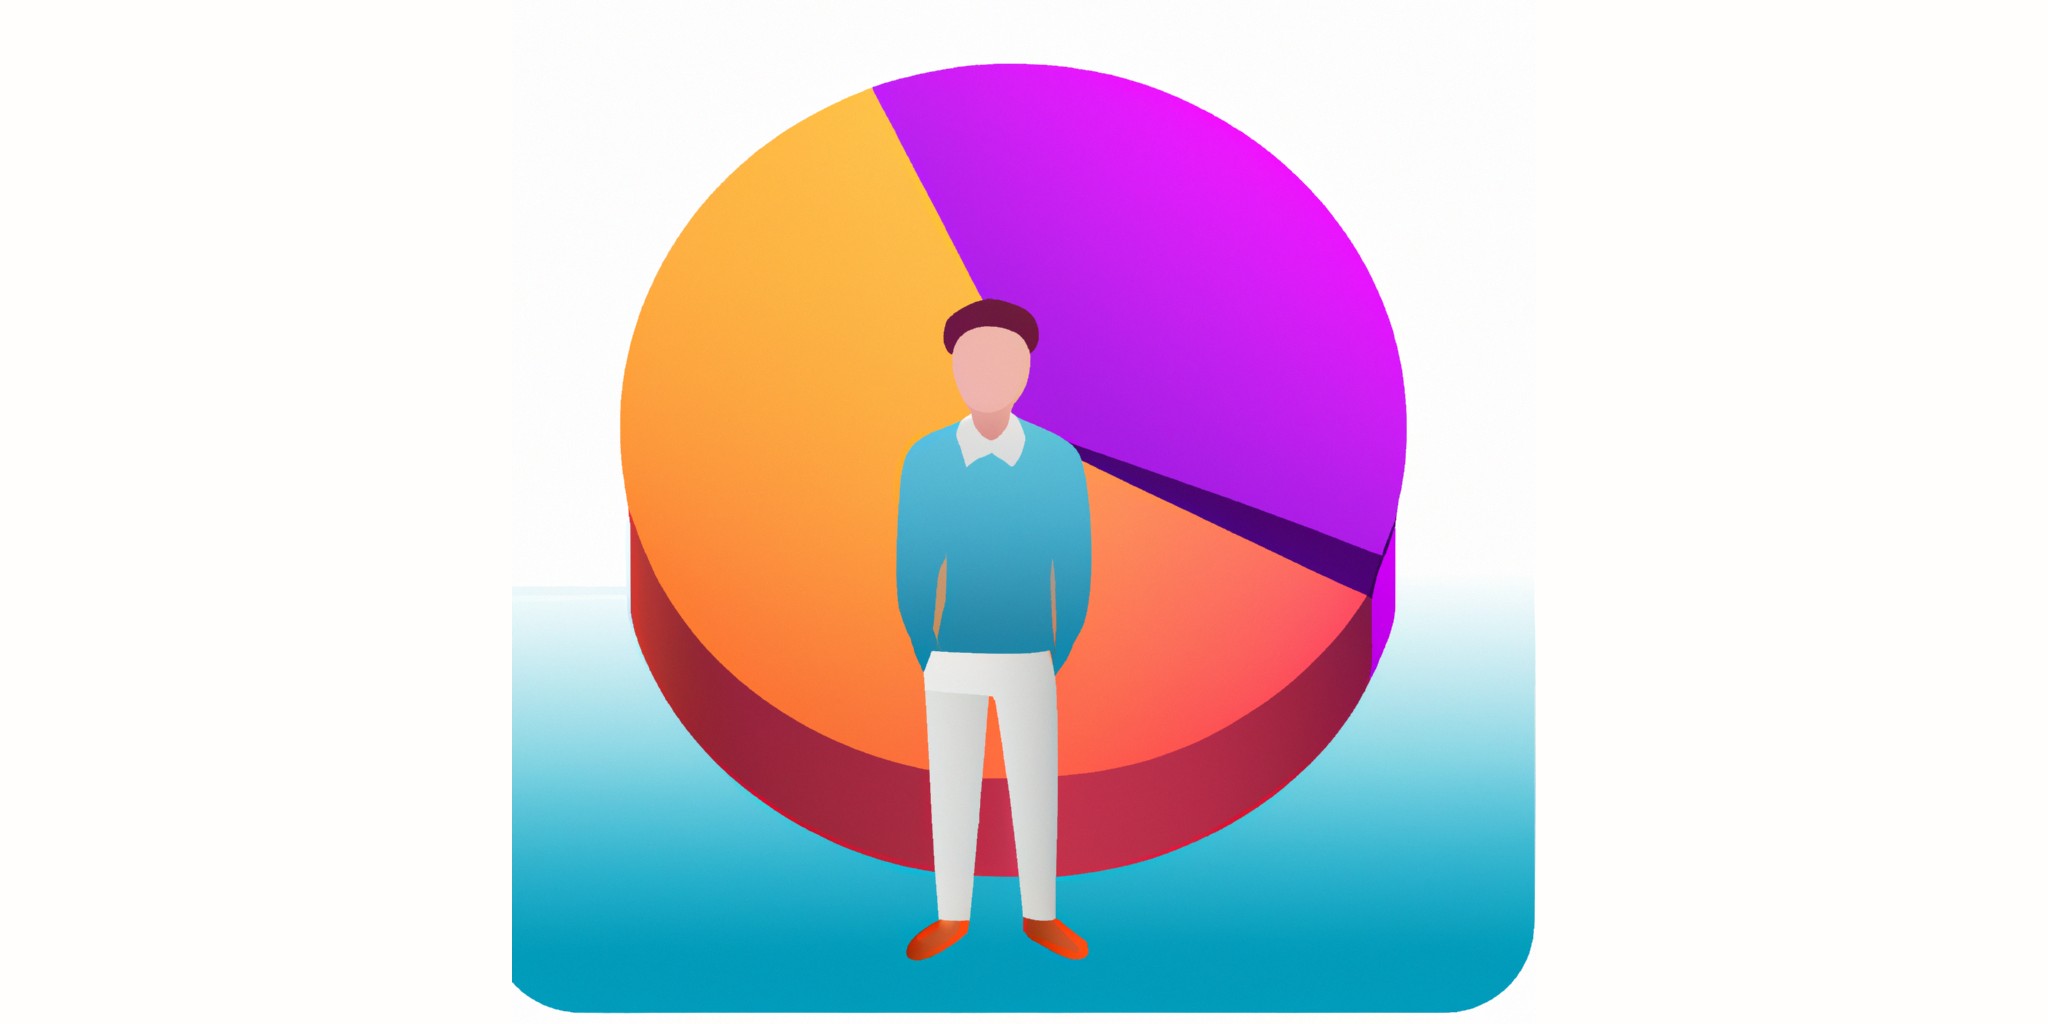 a pie or pie graph with a person in front in flat illustration style with gradients and white background